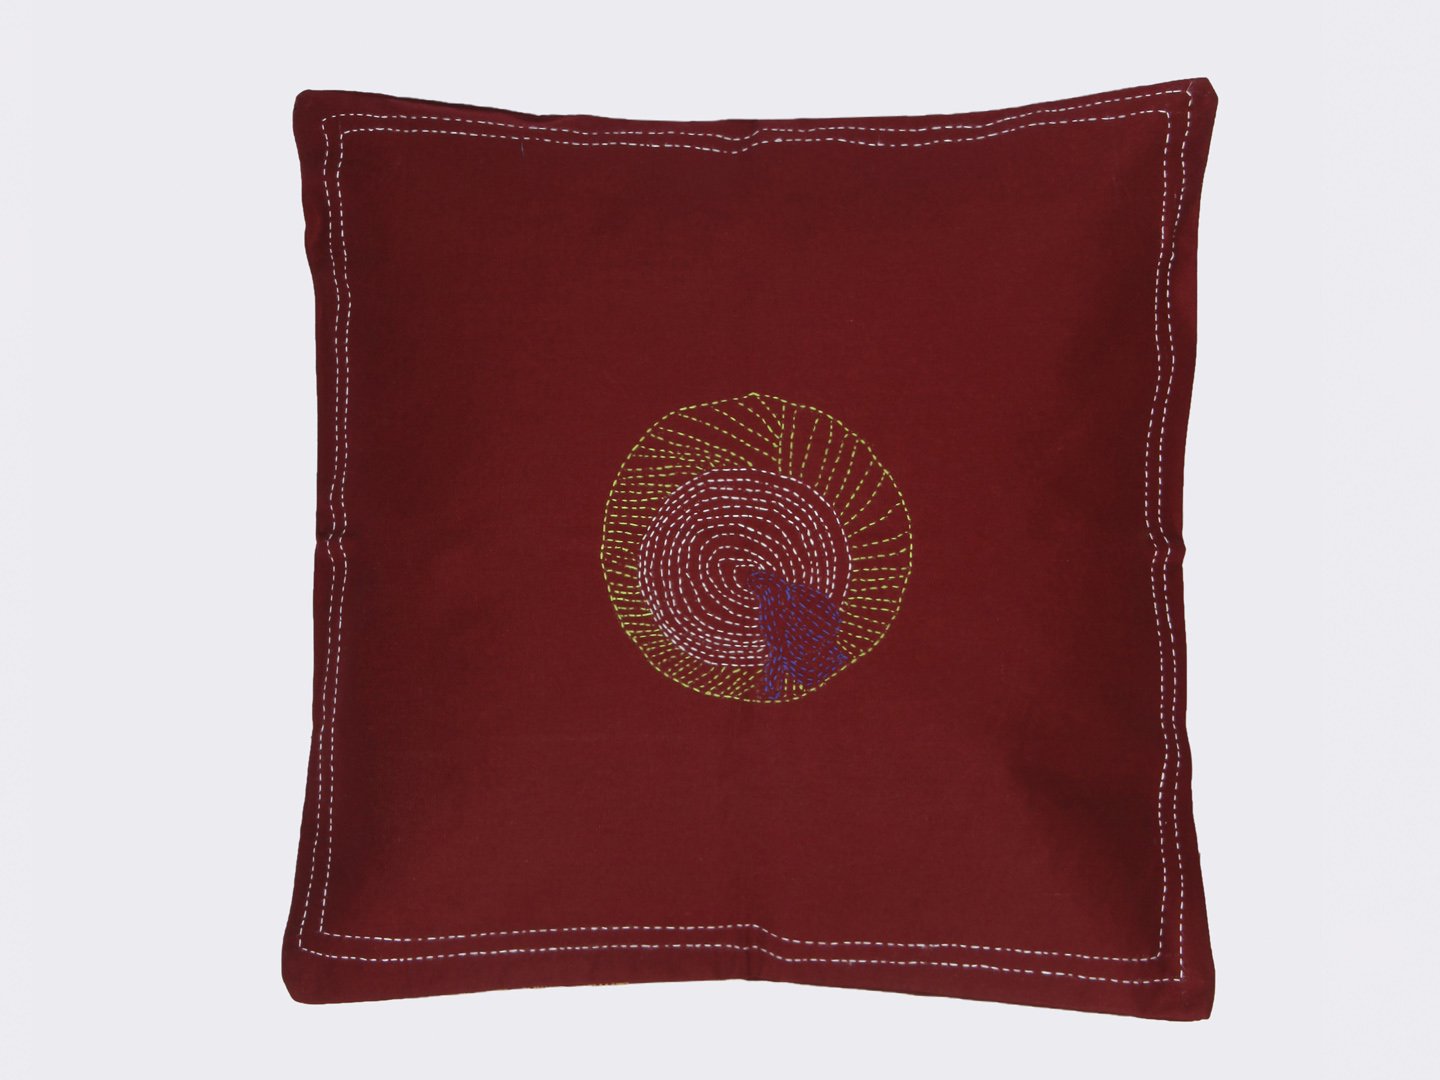 Maroon Handcrafted Kantha Cushion Cover - Arteastri